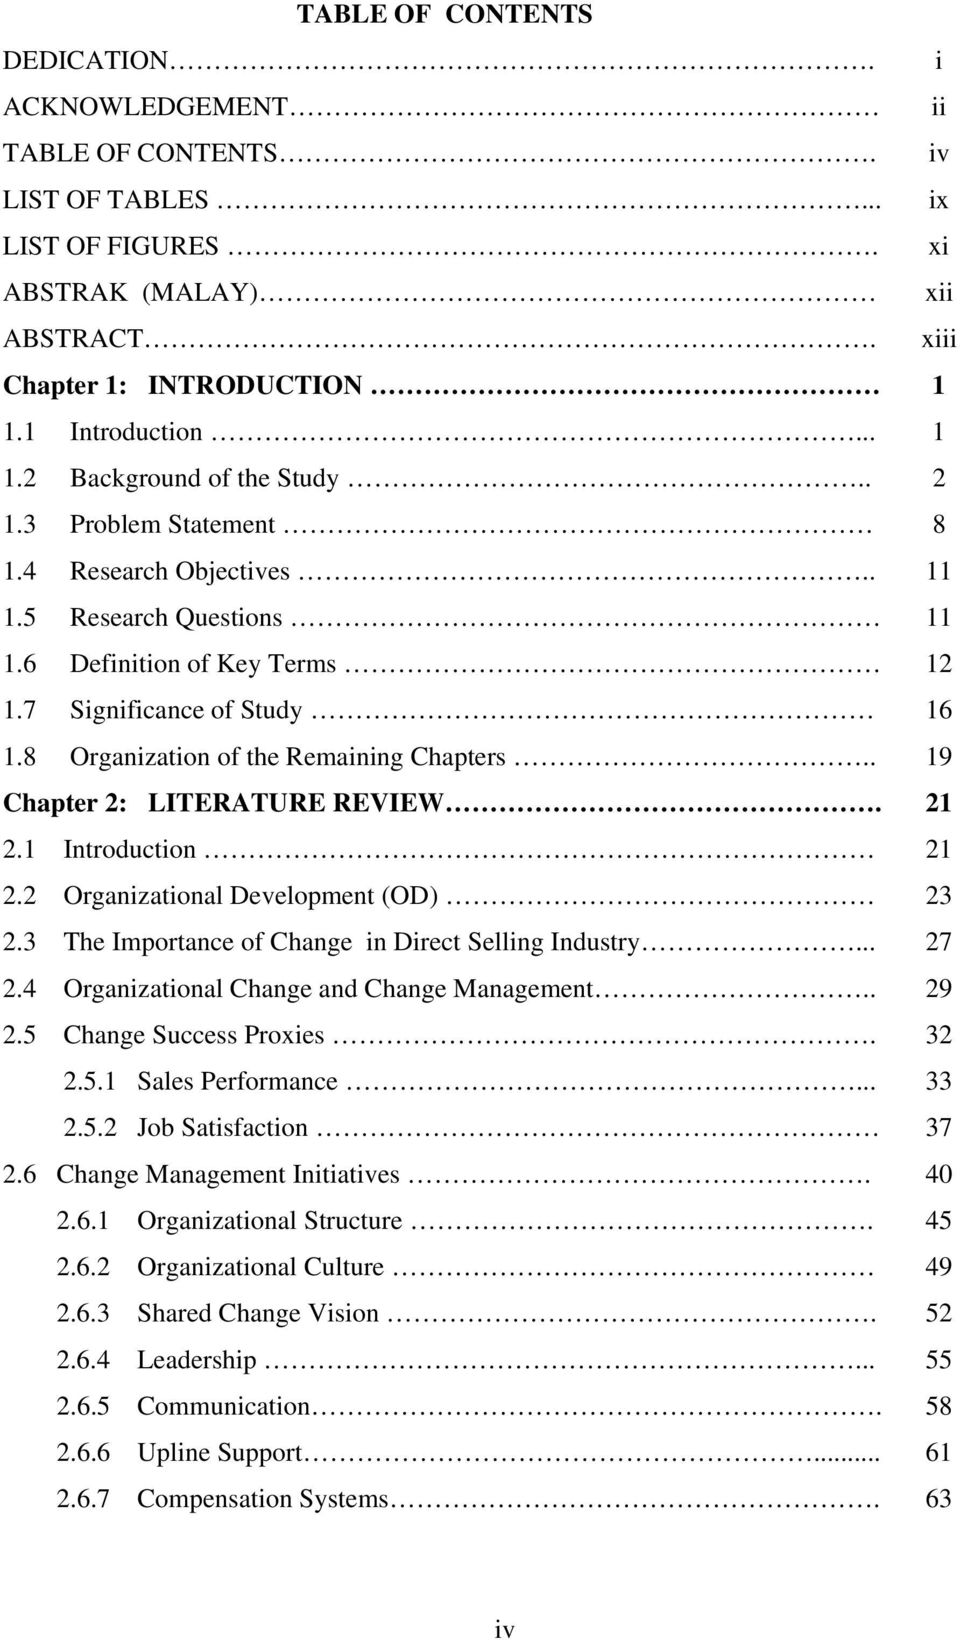 8 Organization of the Remaining Chapters.. 19 Chapter 2: LITERATURE REVIEW. 21 2.1 Introduction 21 2.2 Organizational Development (OD) 23 2.3 The Importance of Change in Direct Selling Industry... 27 2.